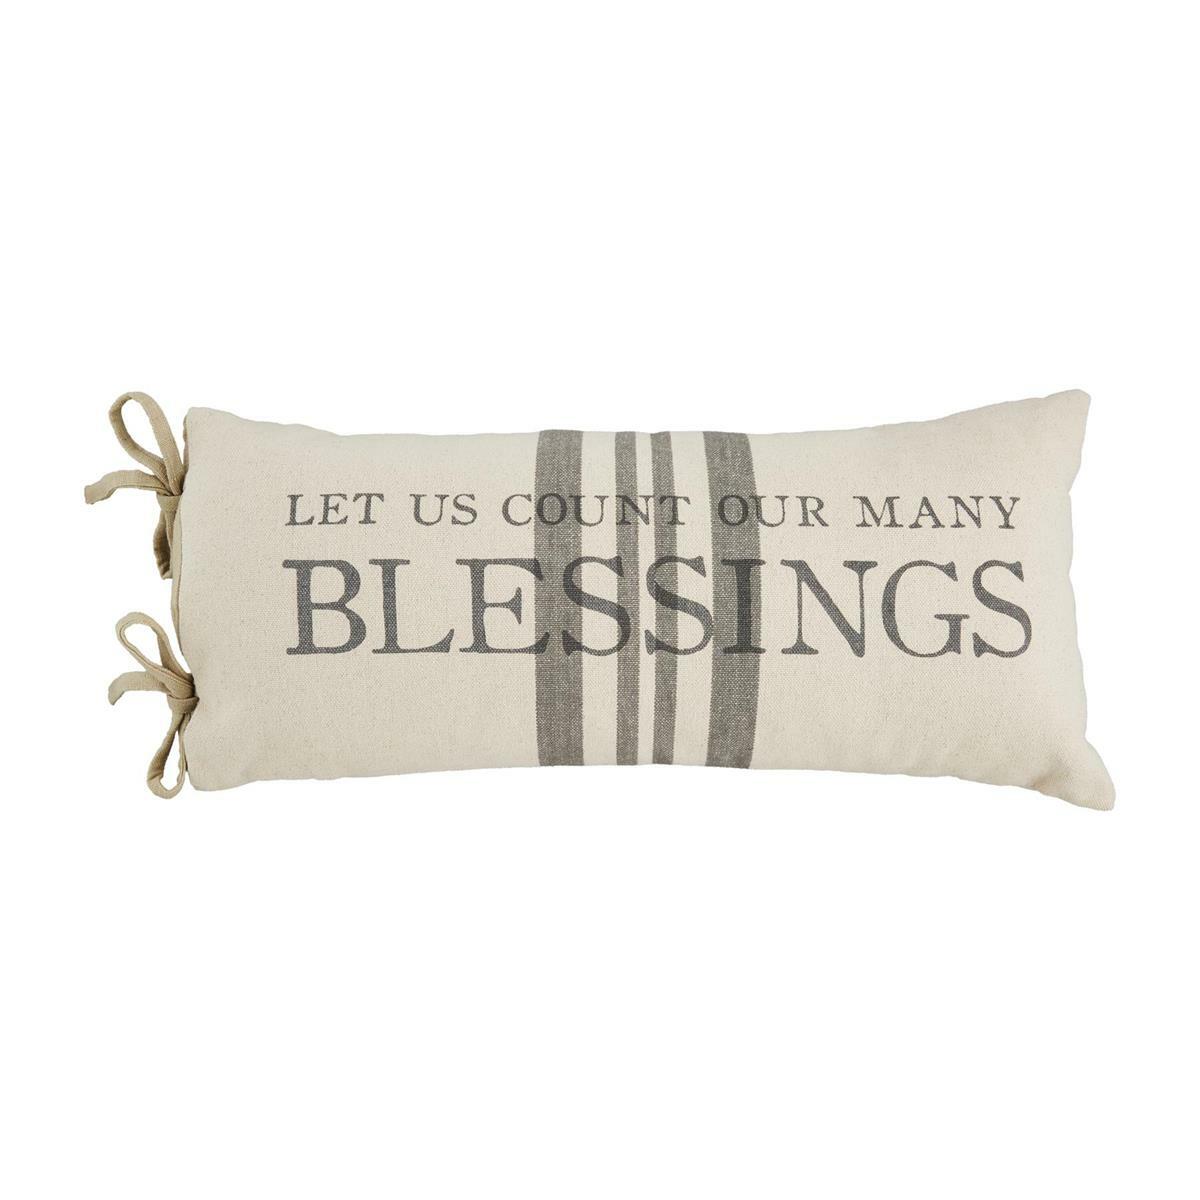 Count Many Blessings Pillow